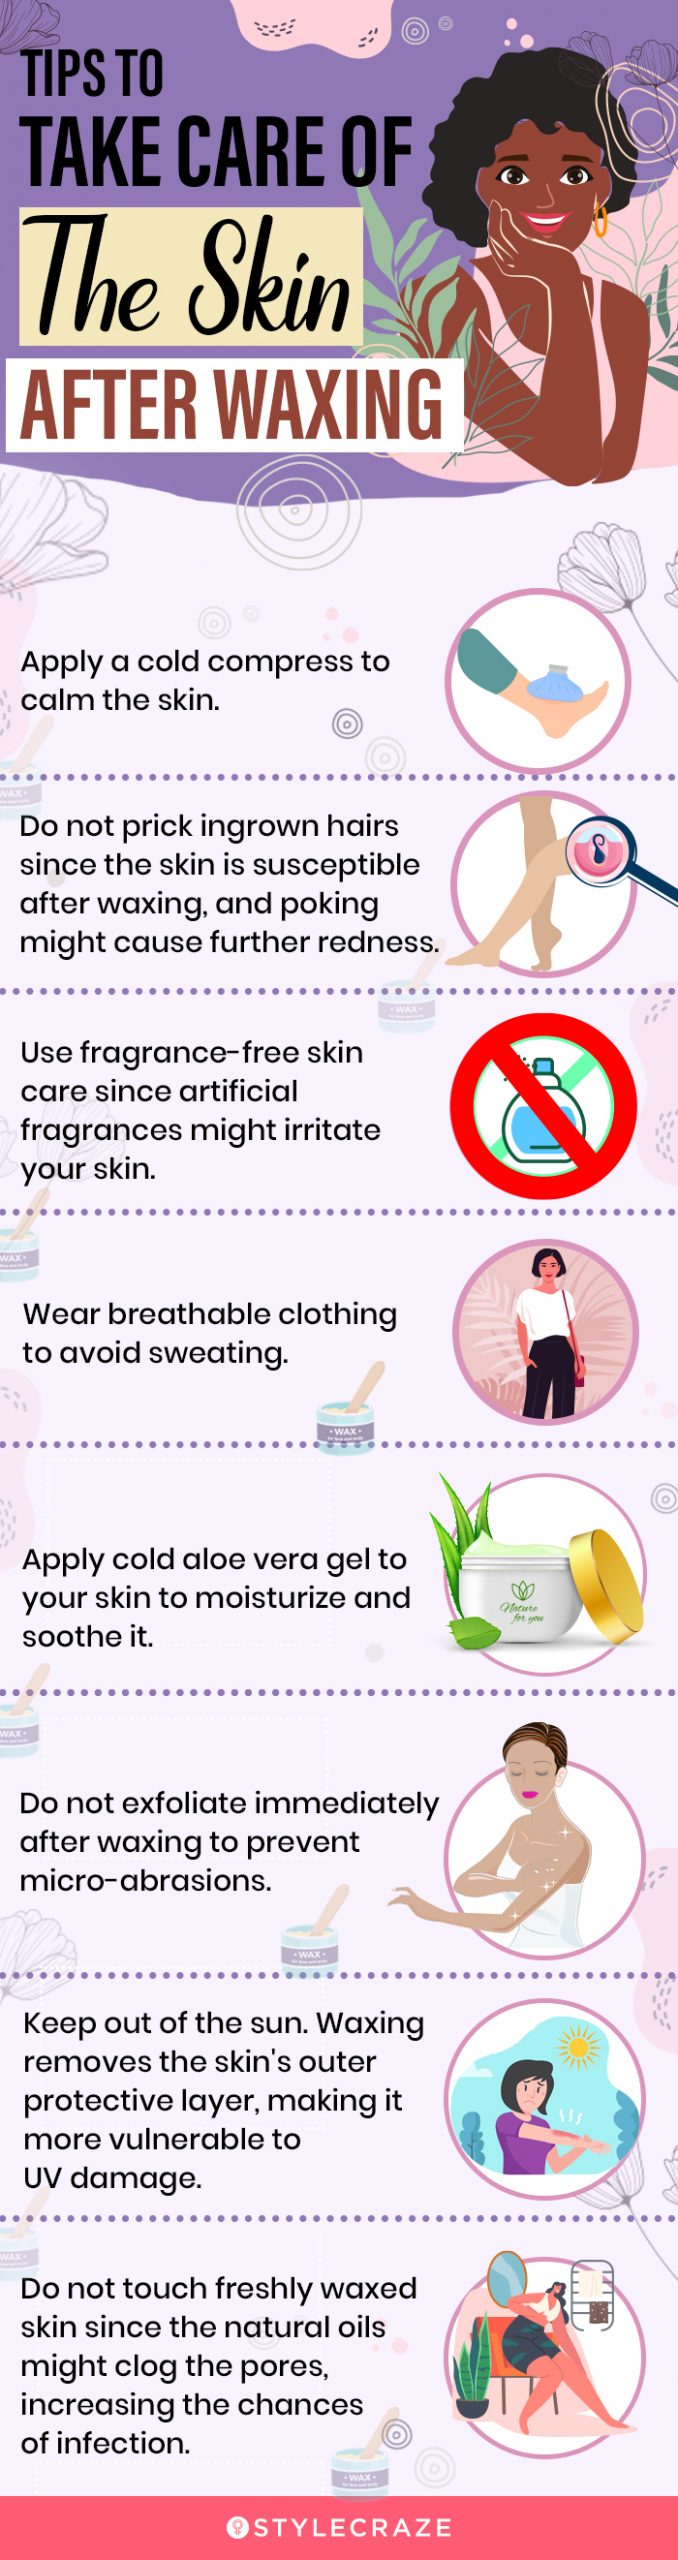 Tips To Take Care Of The Skin After Waxing (infographic)